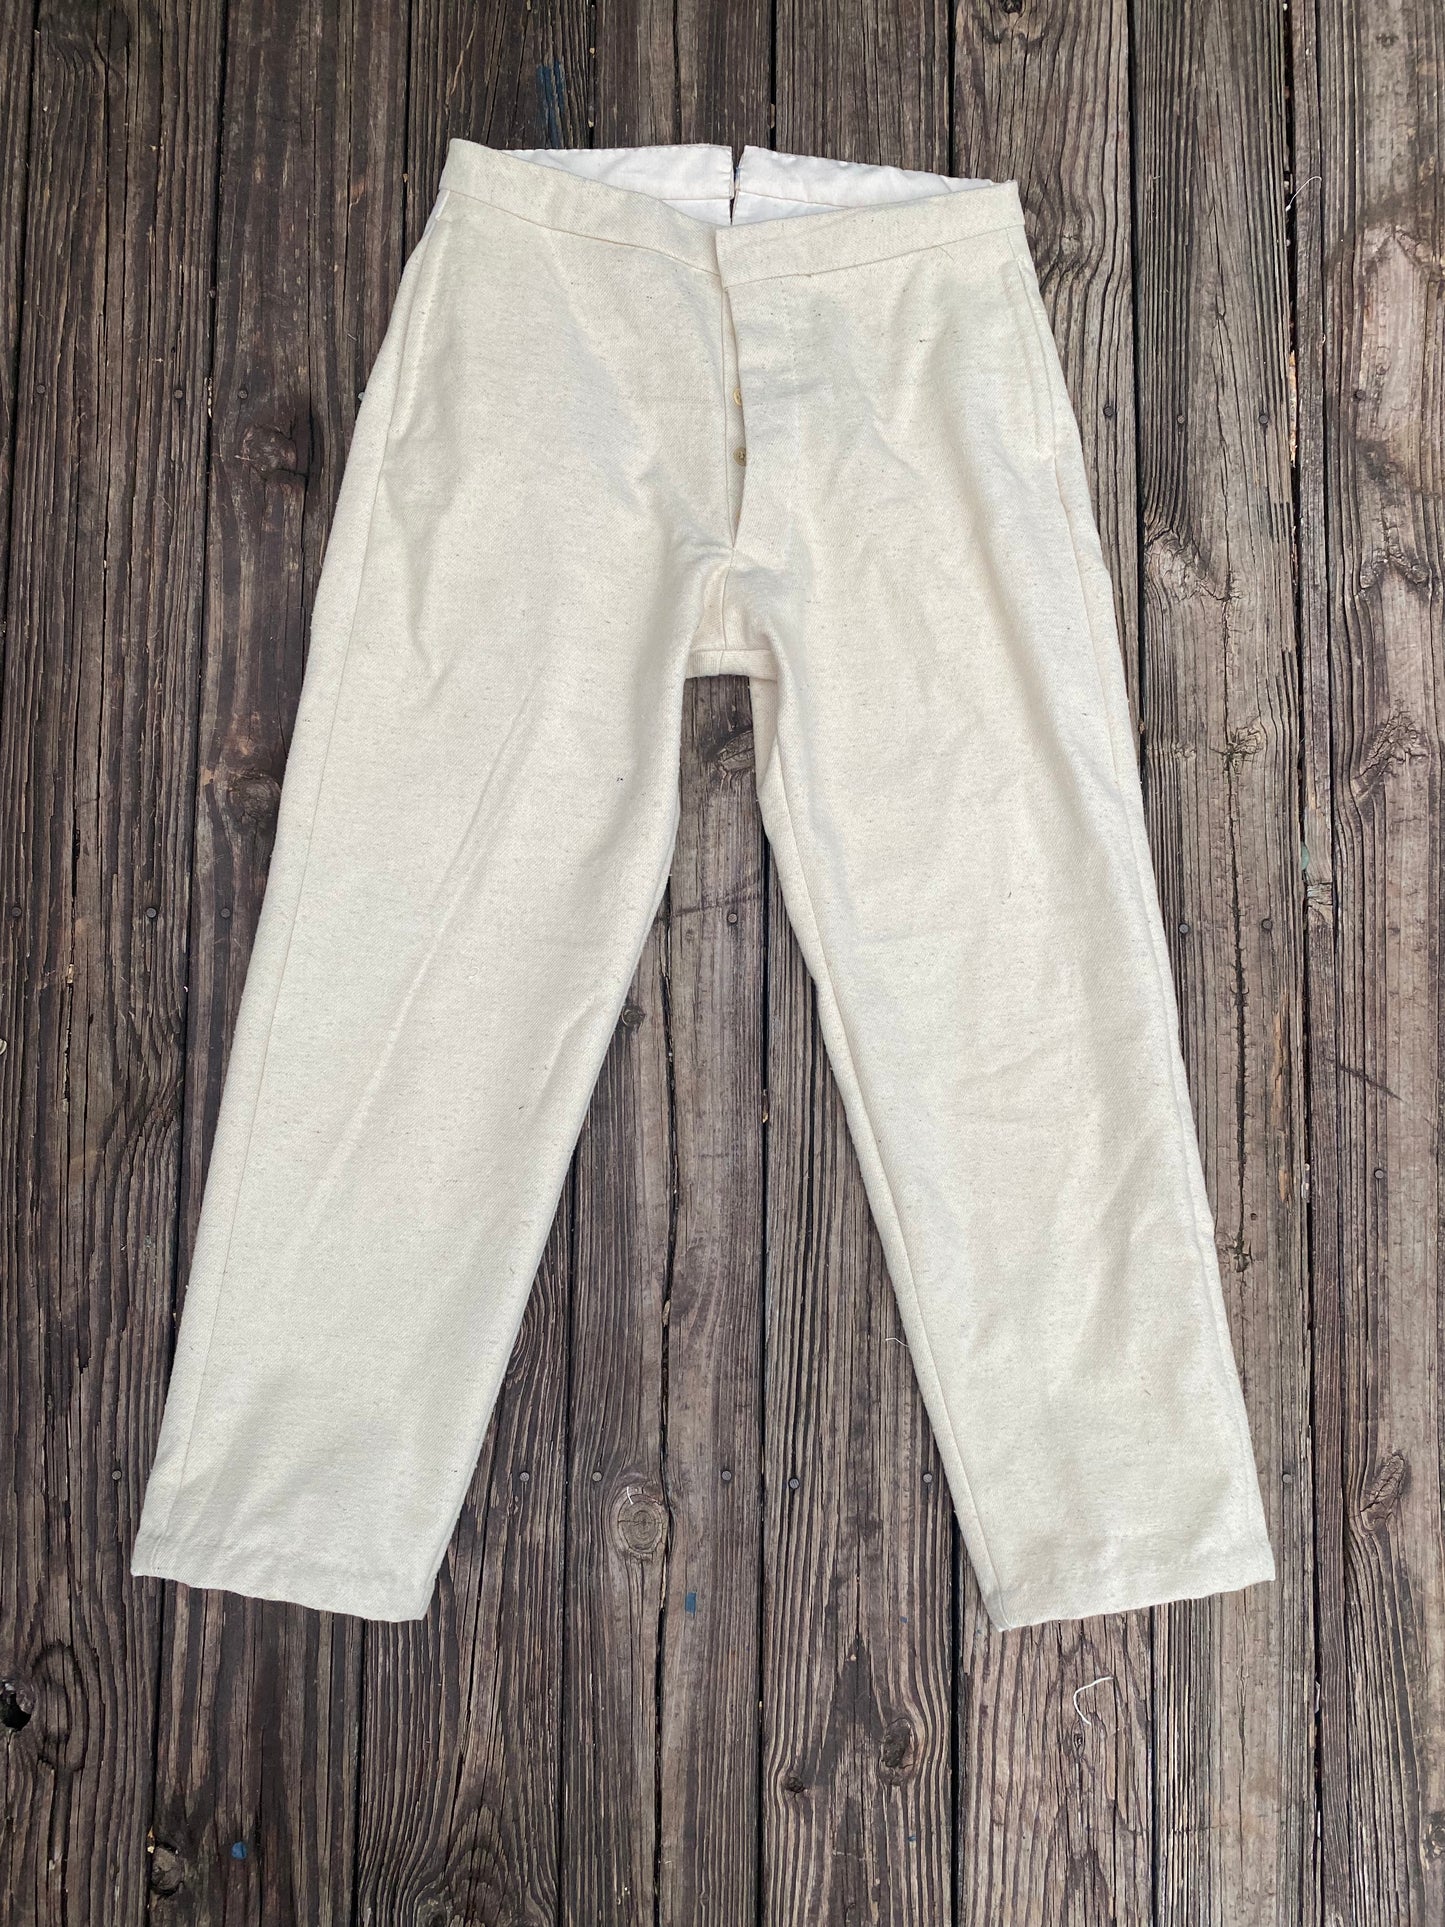 Georgia Relief and Hospital Association Trousers